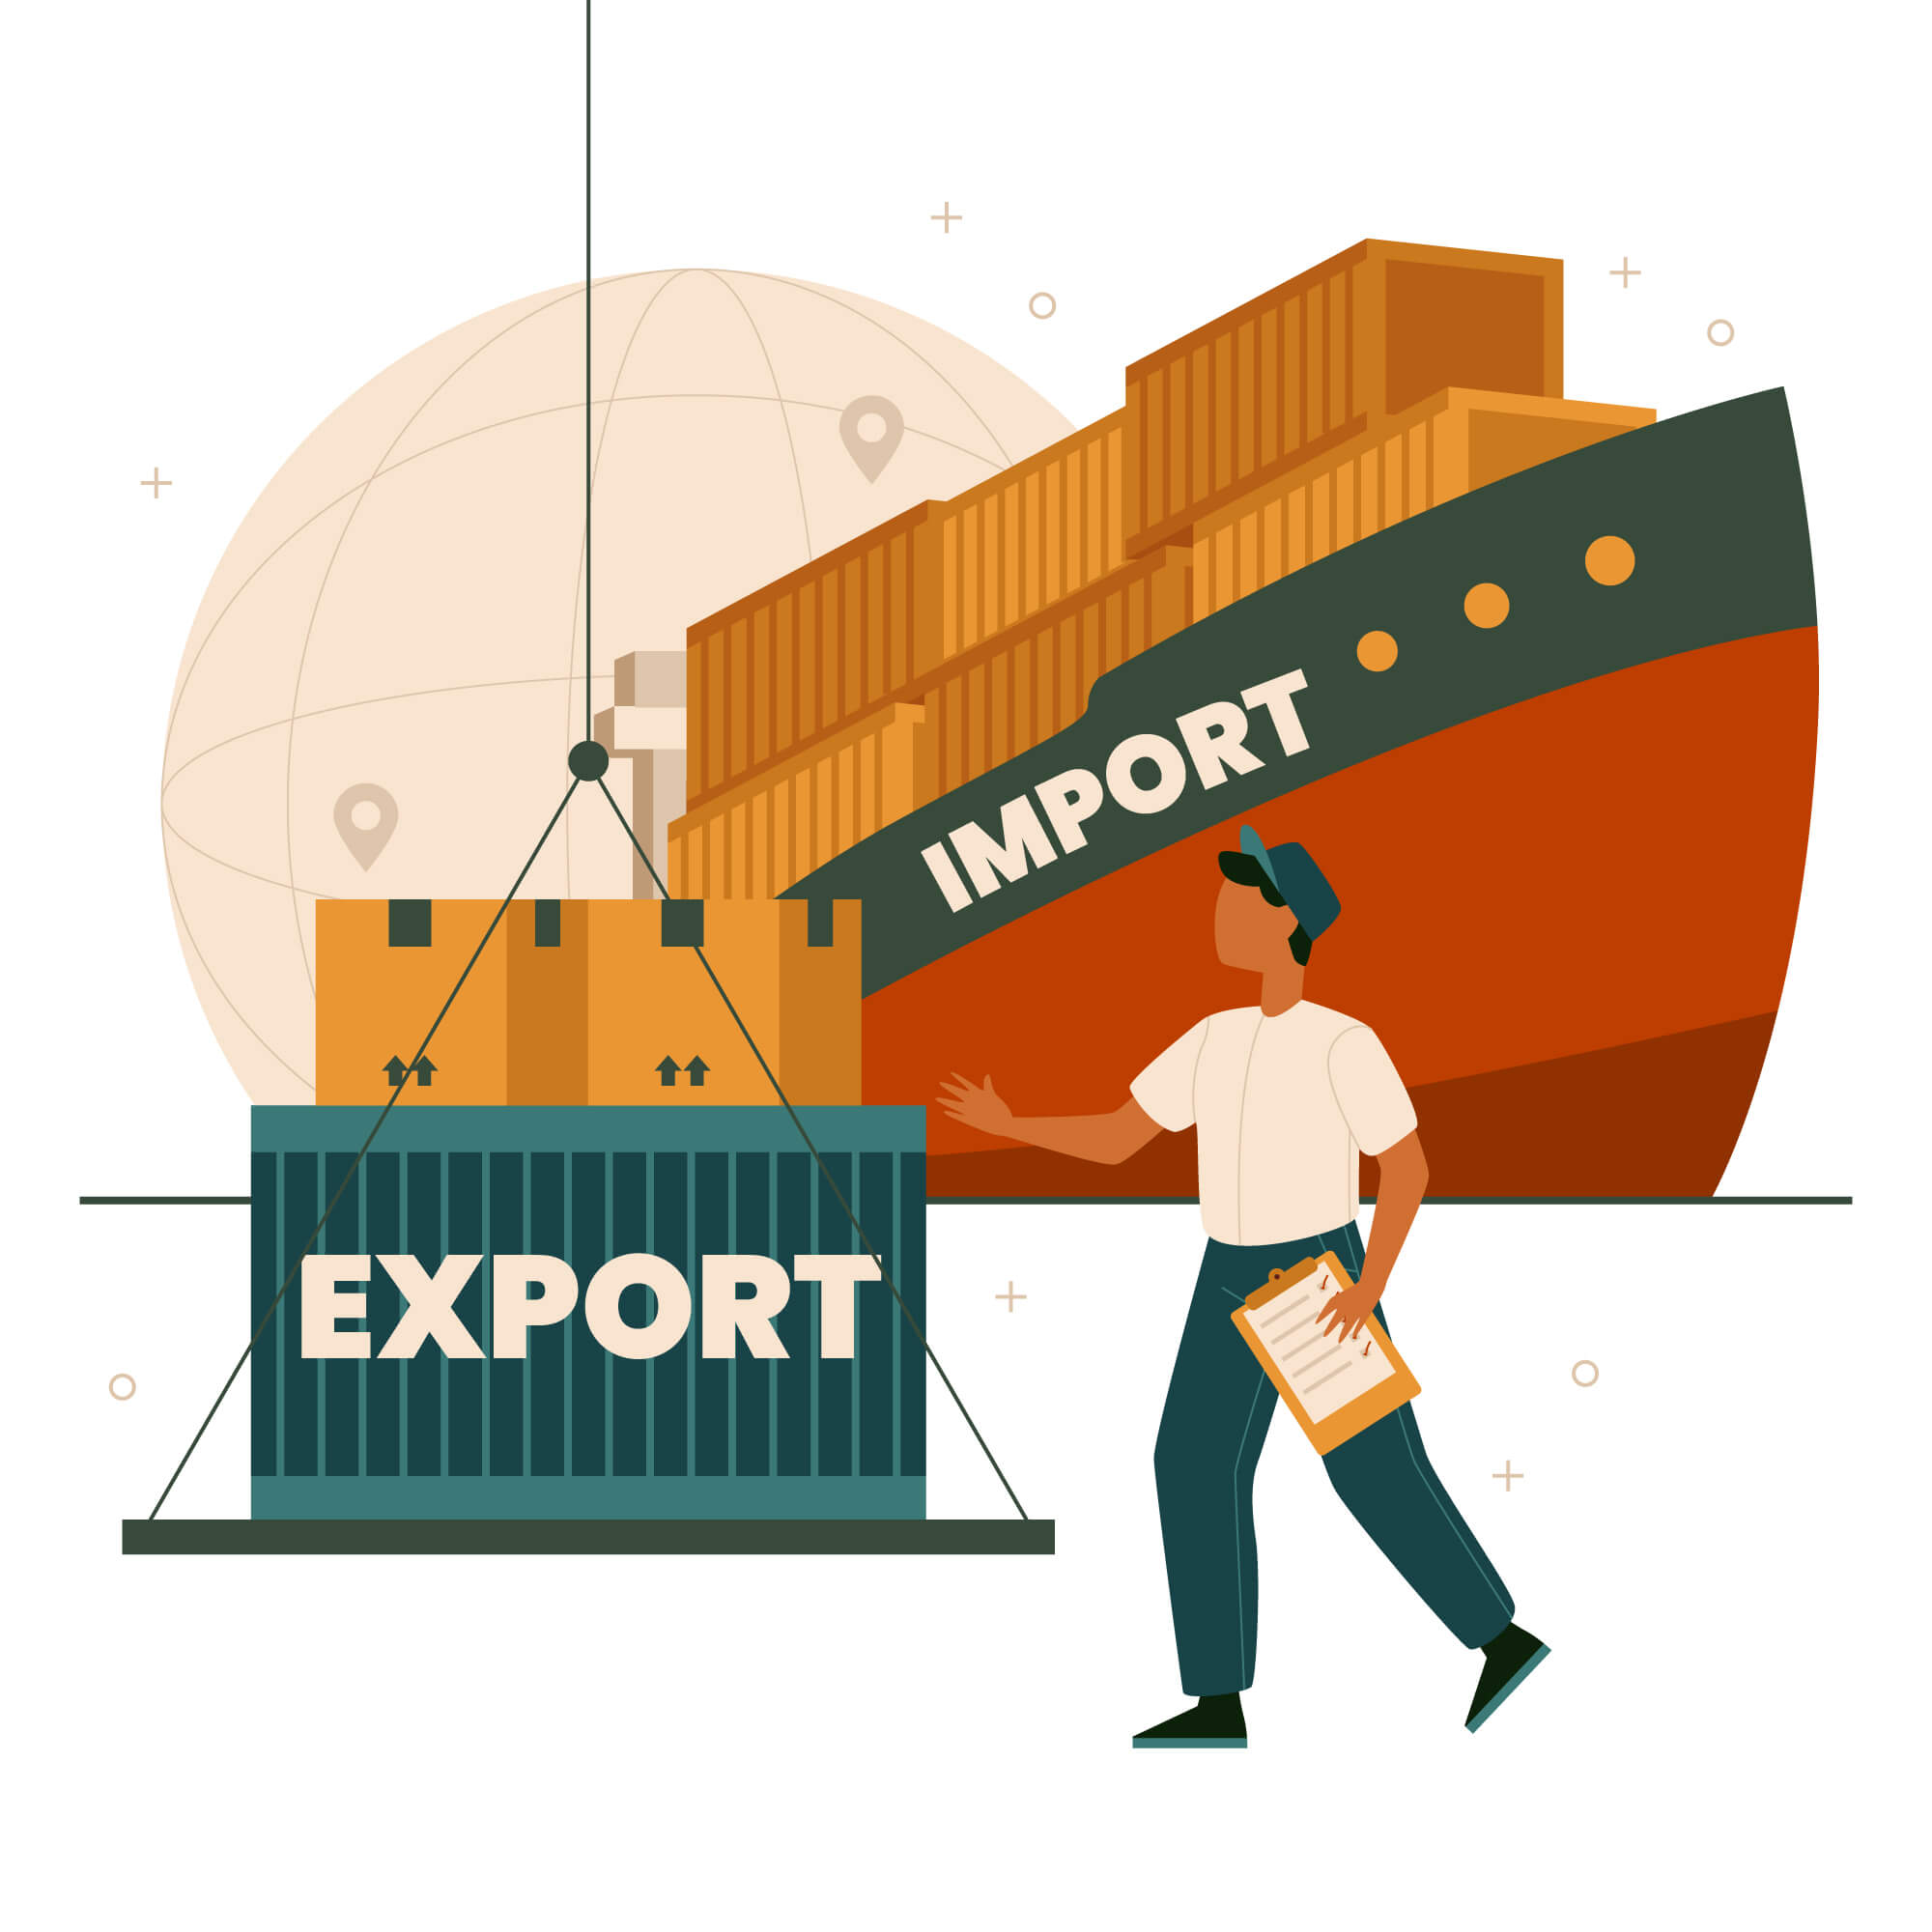 Export/import Incoterms2020